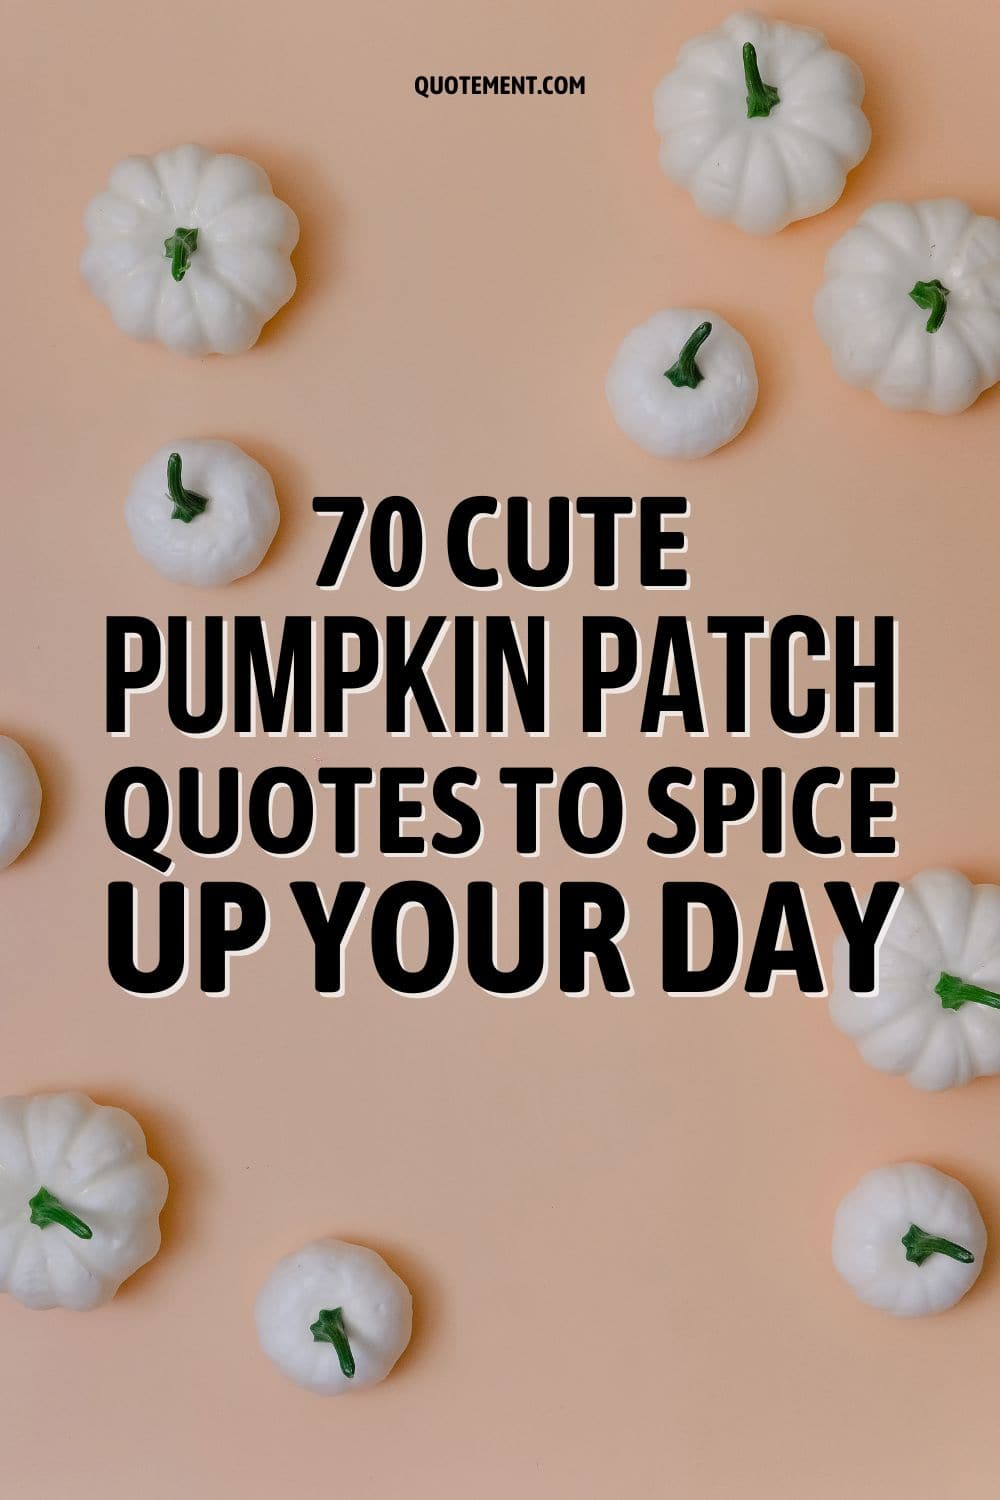 70 Cute Pumpkin Patch Quotes To Spice Up Your Day
